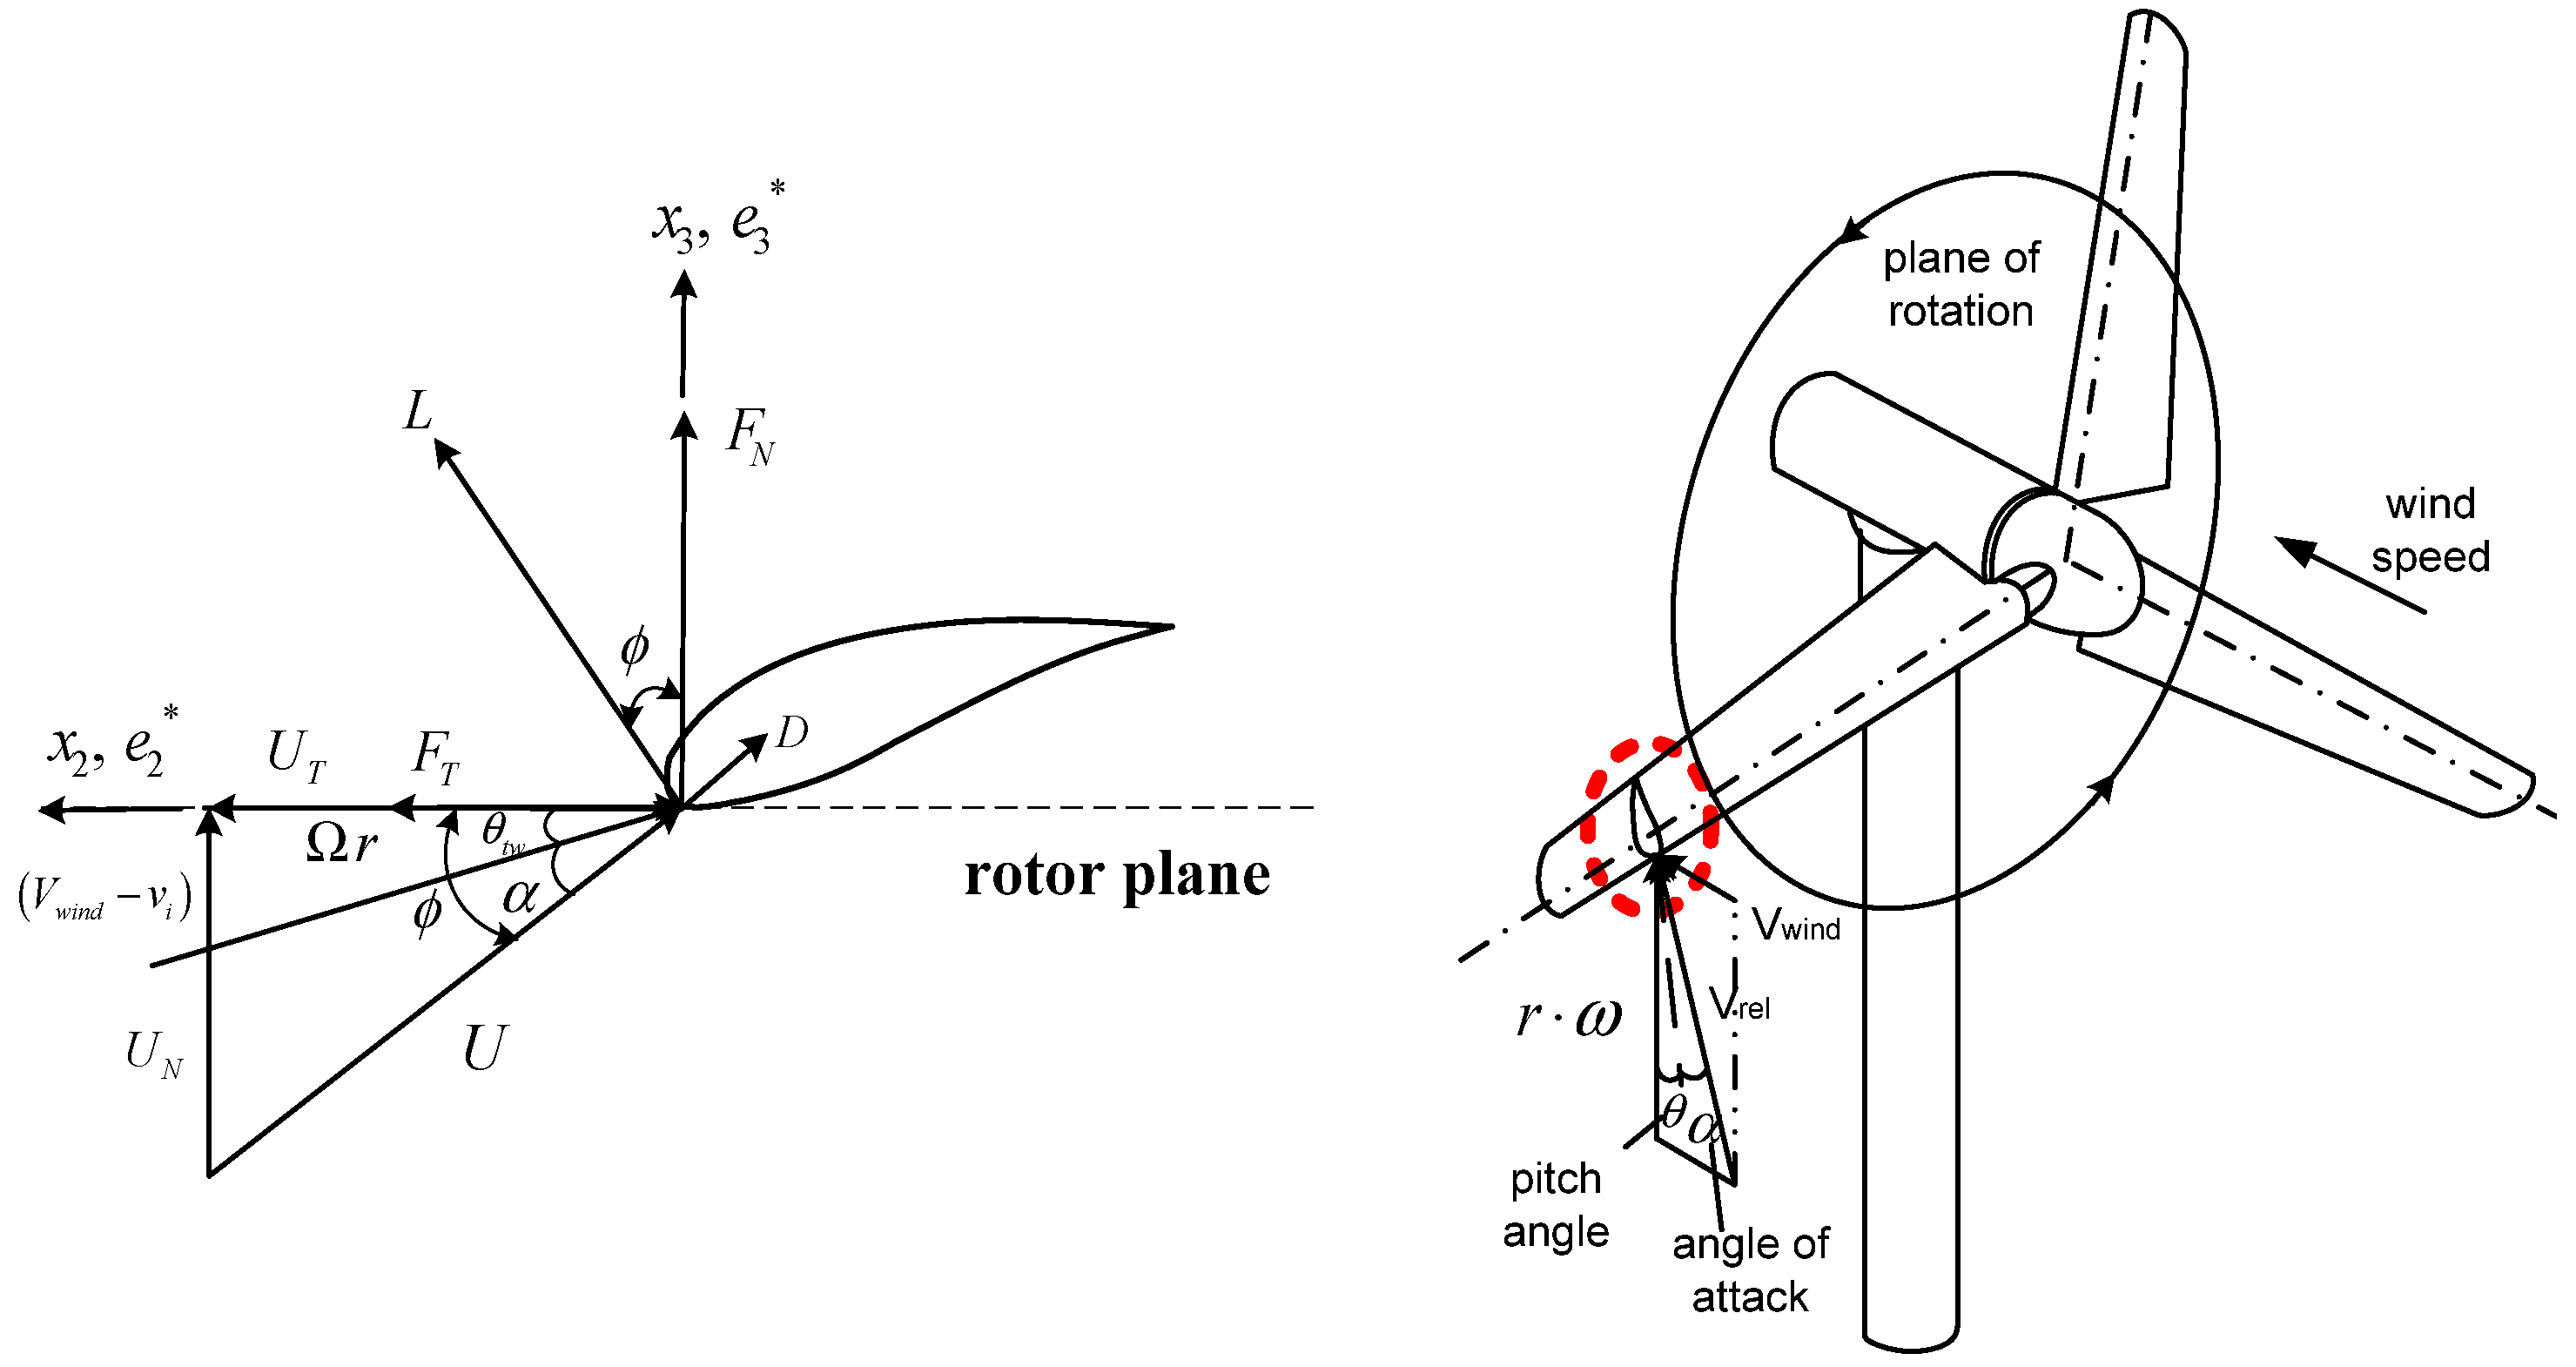  on the Dynamic Stability of a Horizontal Axis Wind Turbine Blade